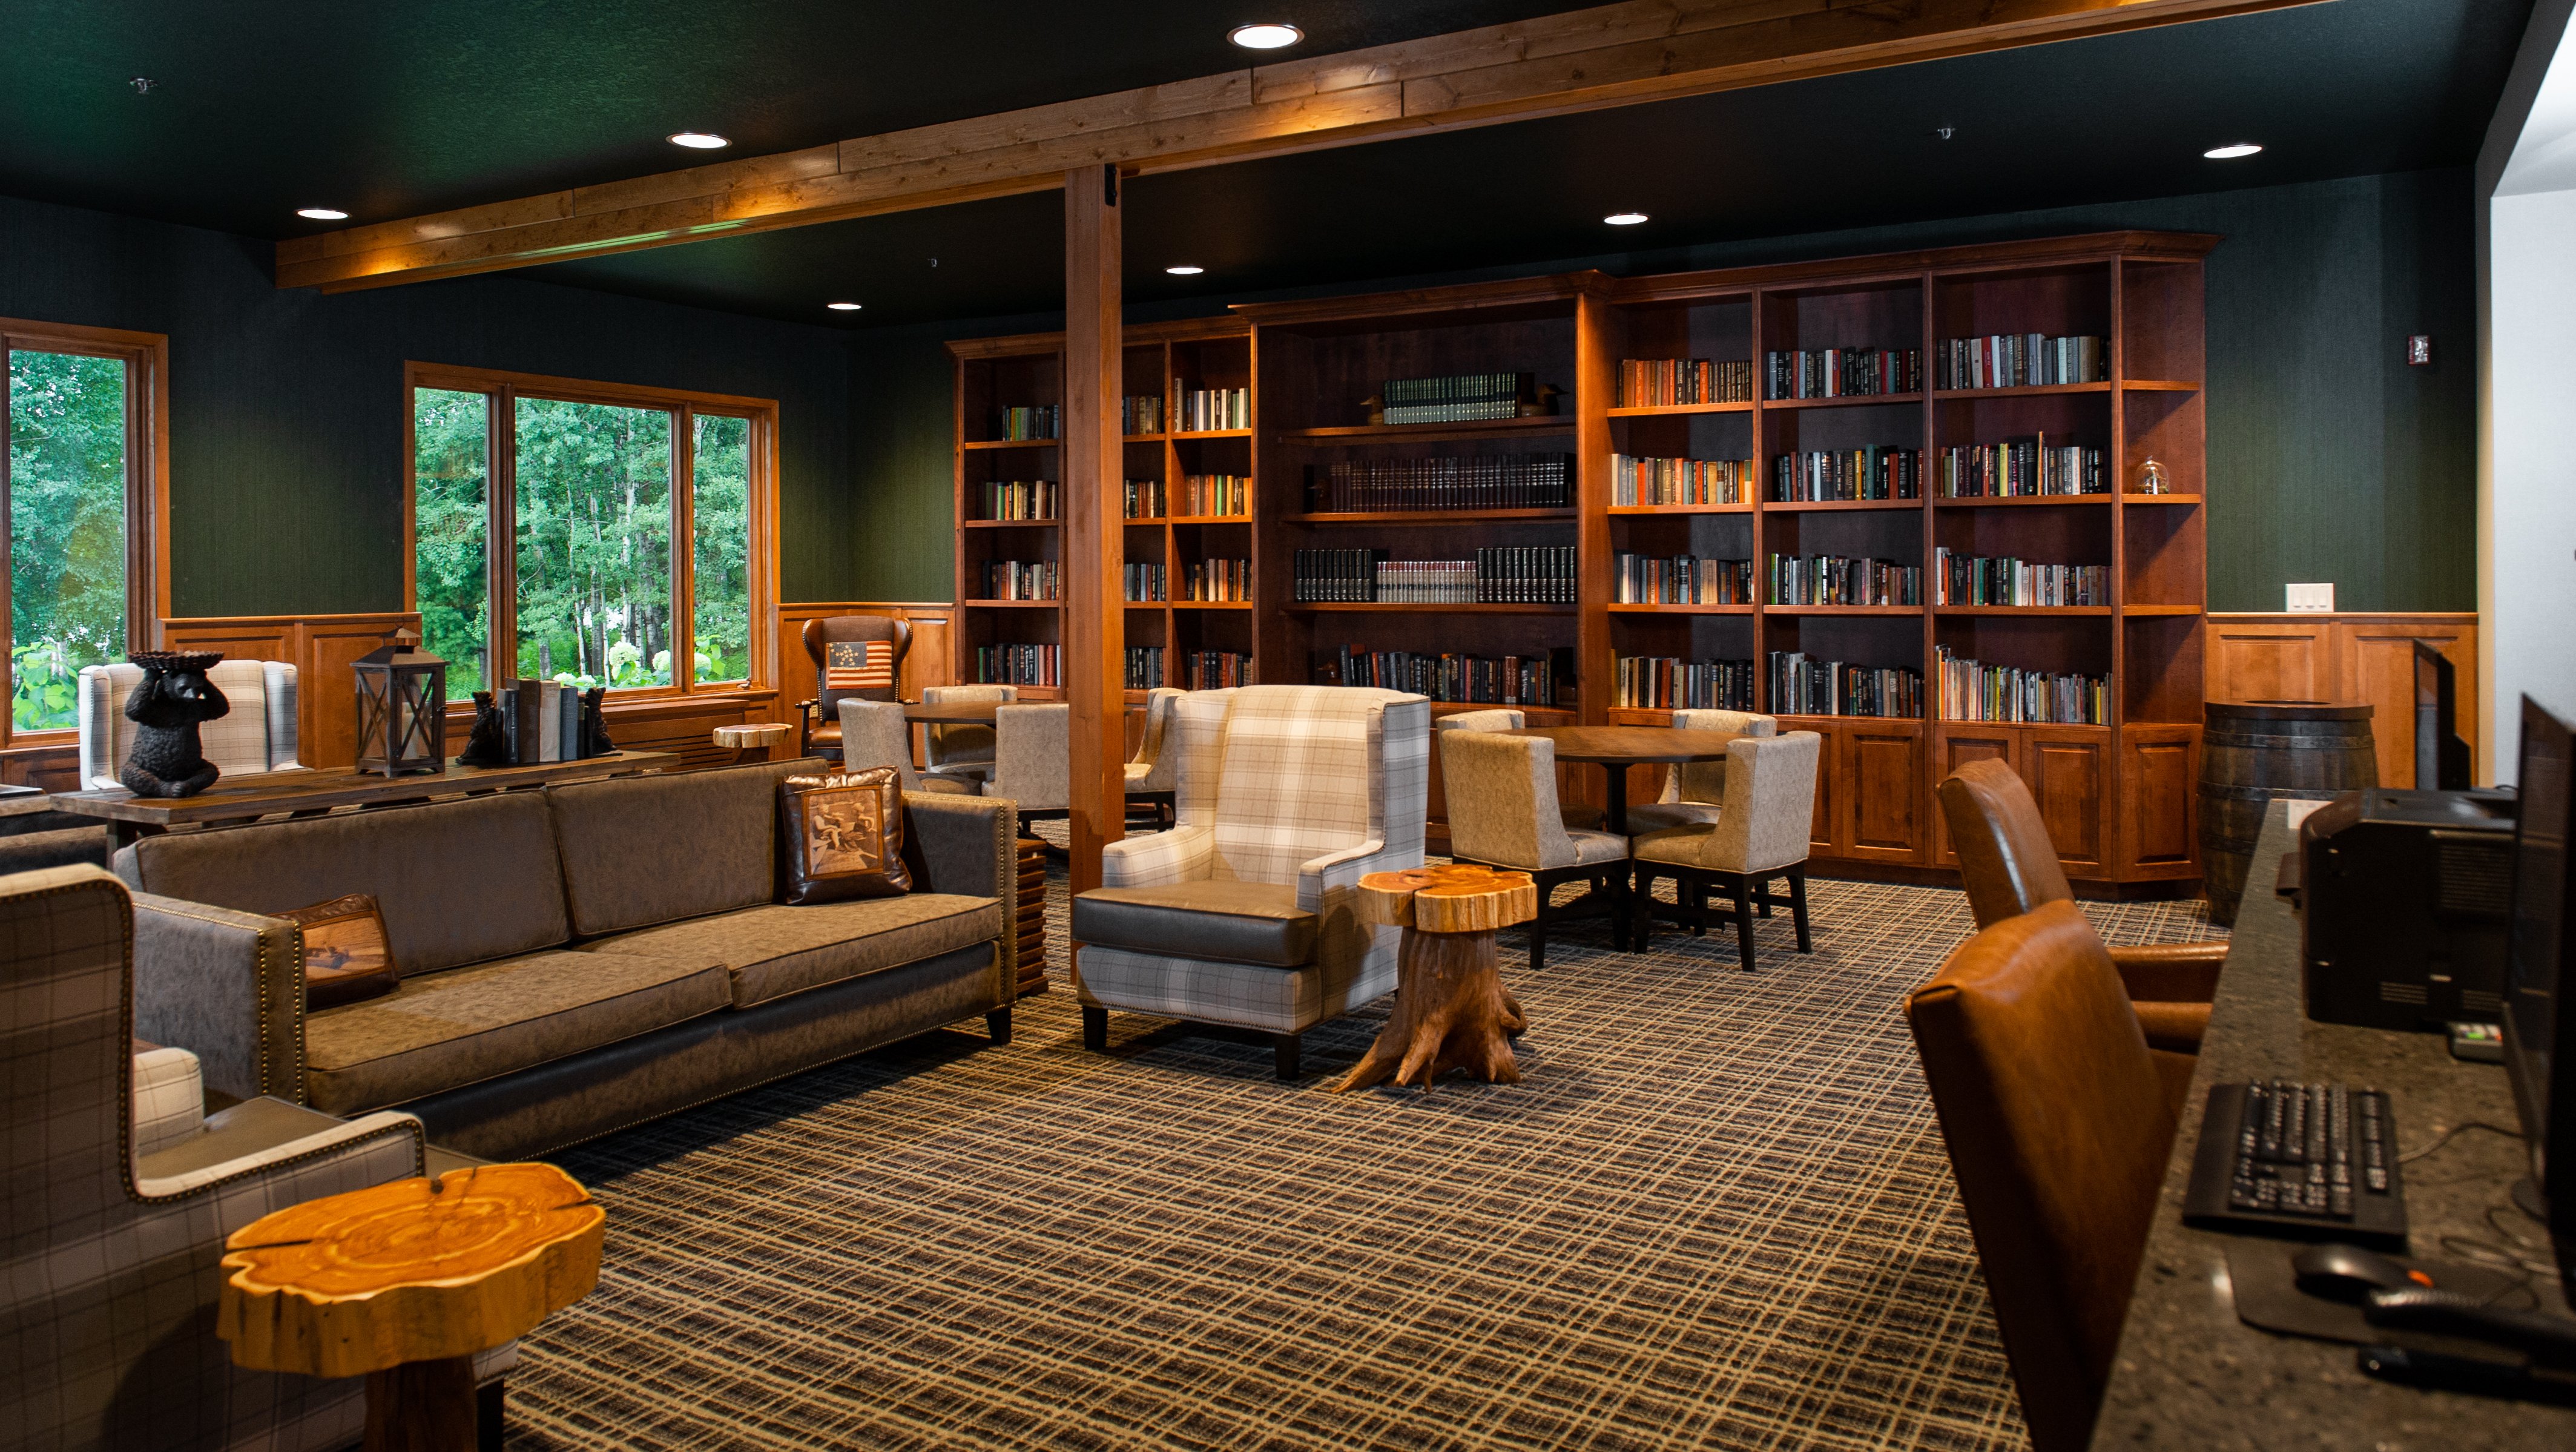 Located near the lobby, the library guest lounge is relaxing